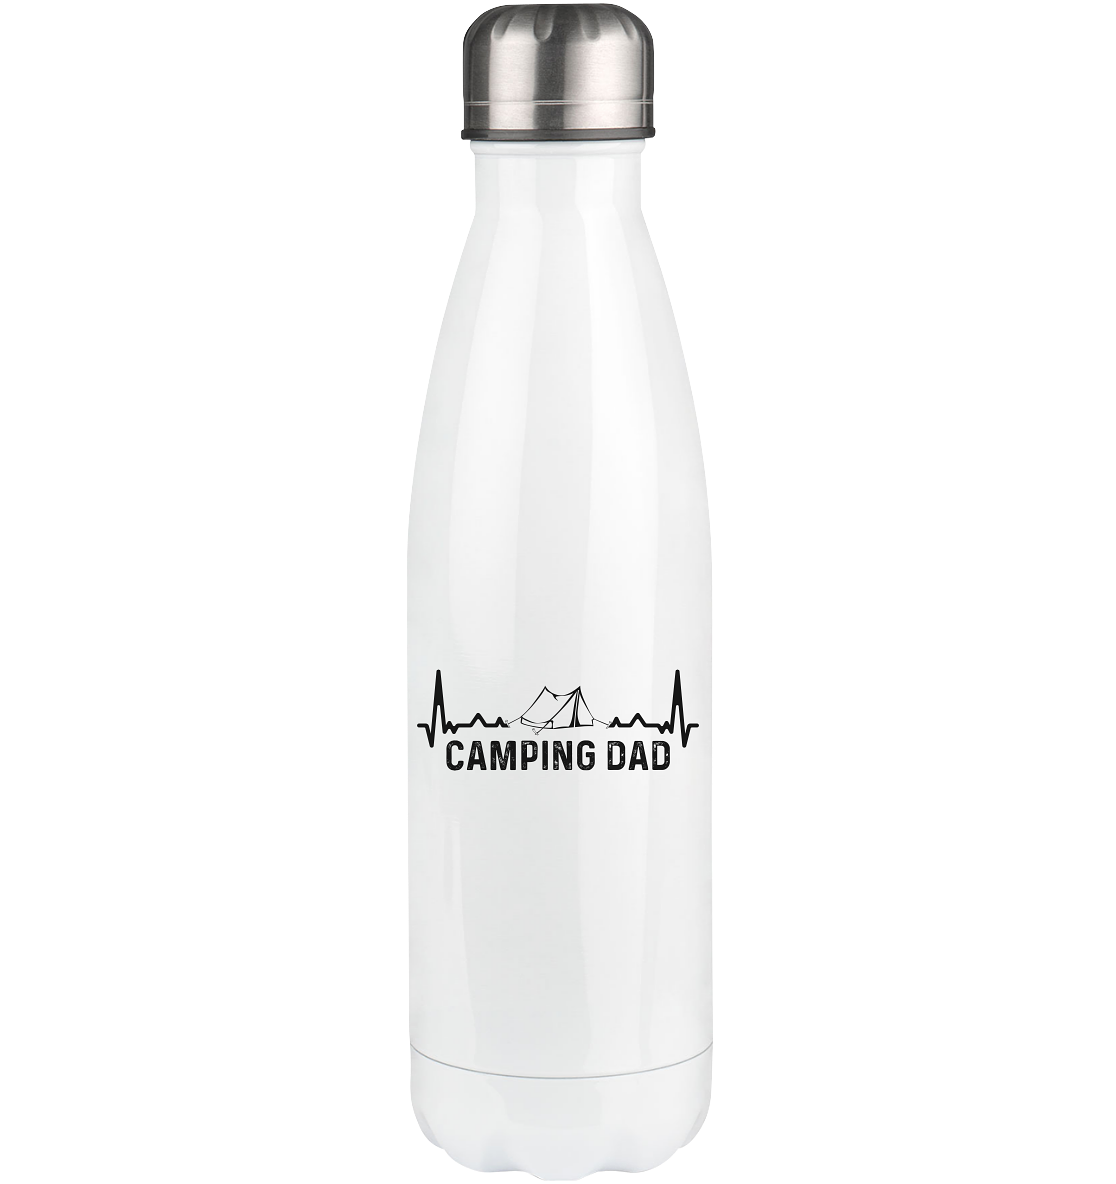 Camping Dad 5 - Edelstahl Thermosflasche camping UONP 500ml